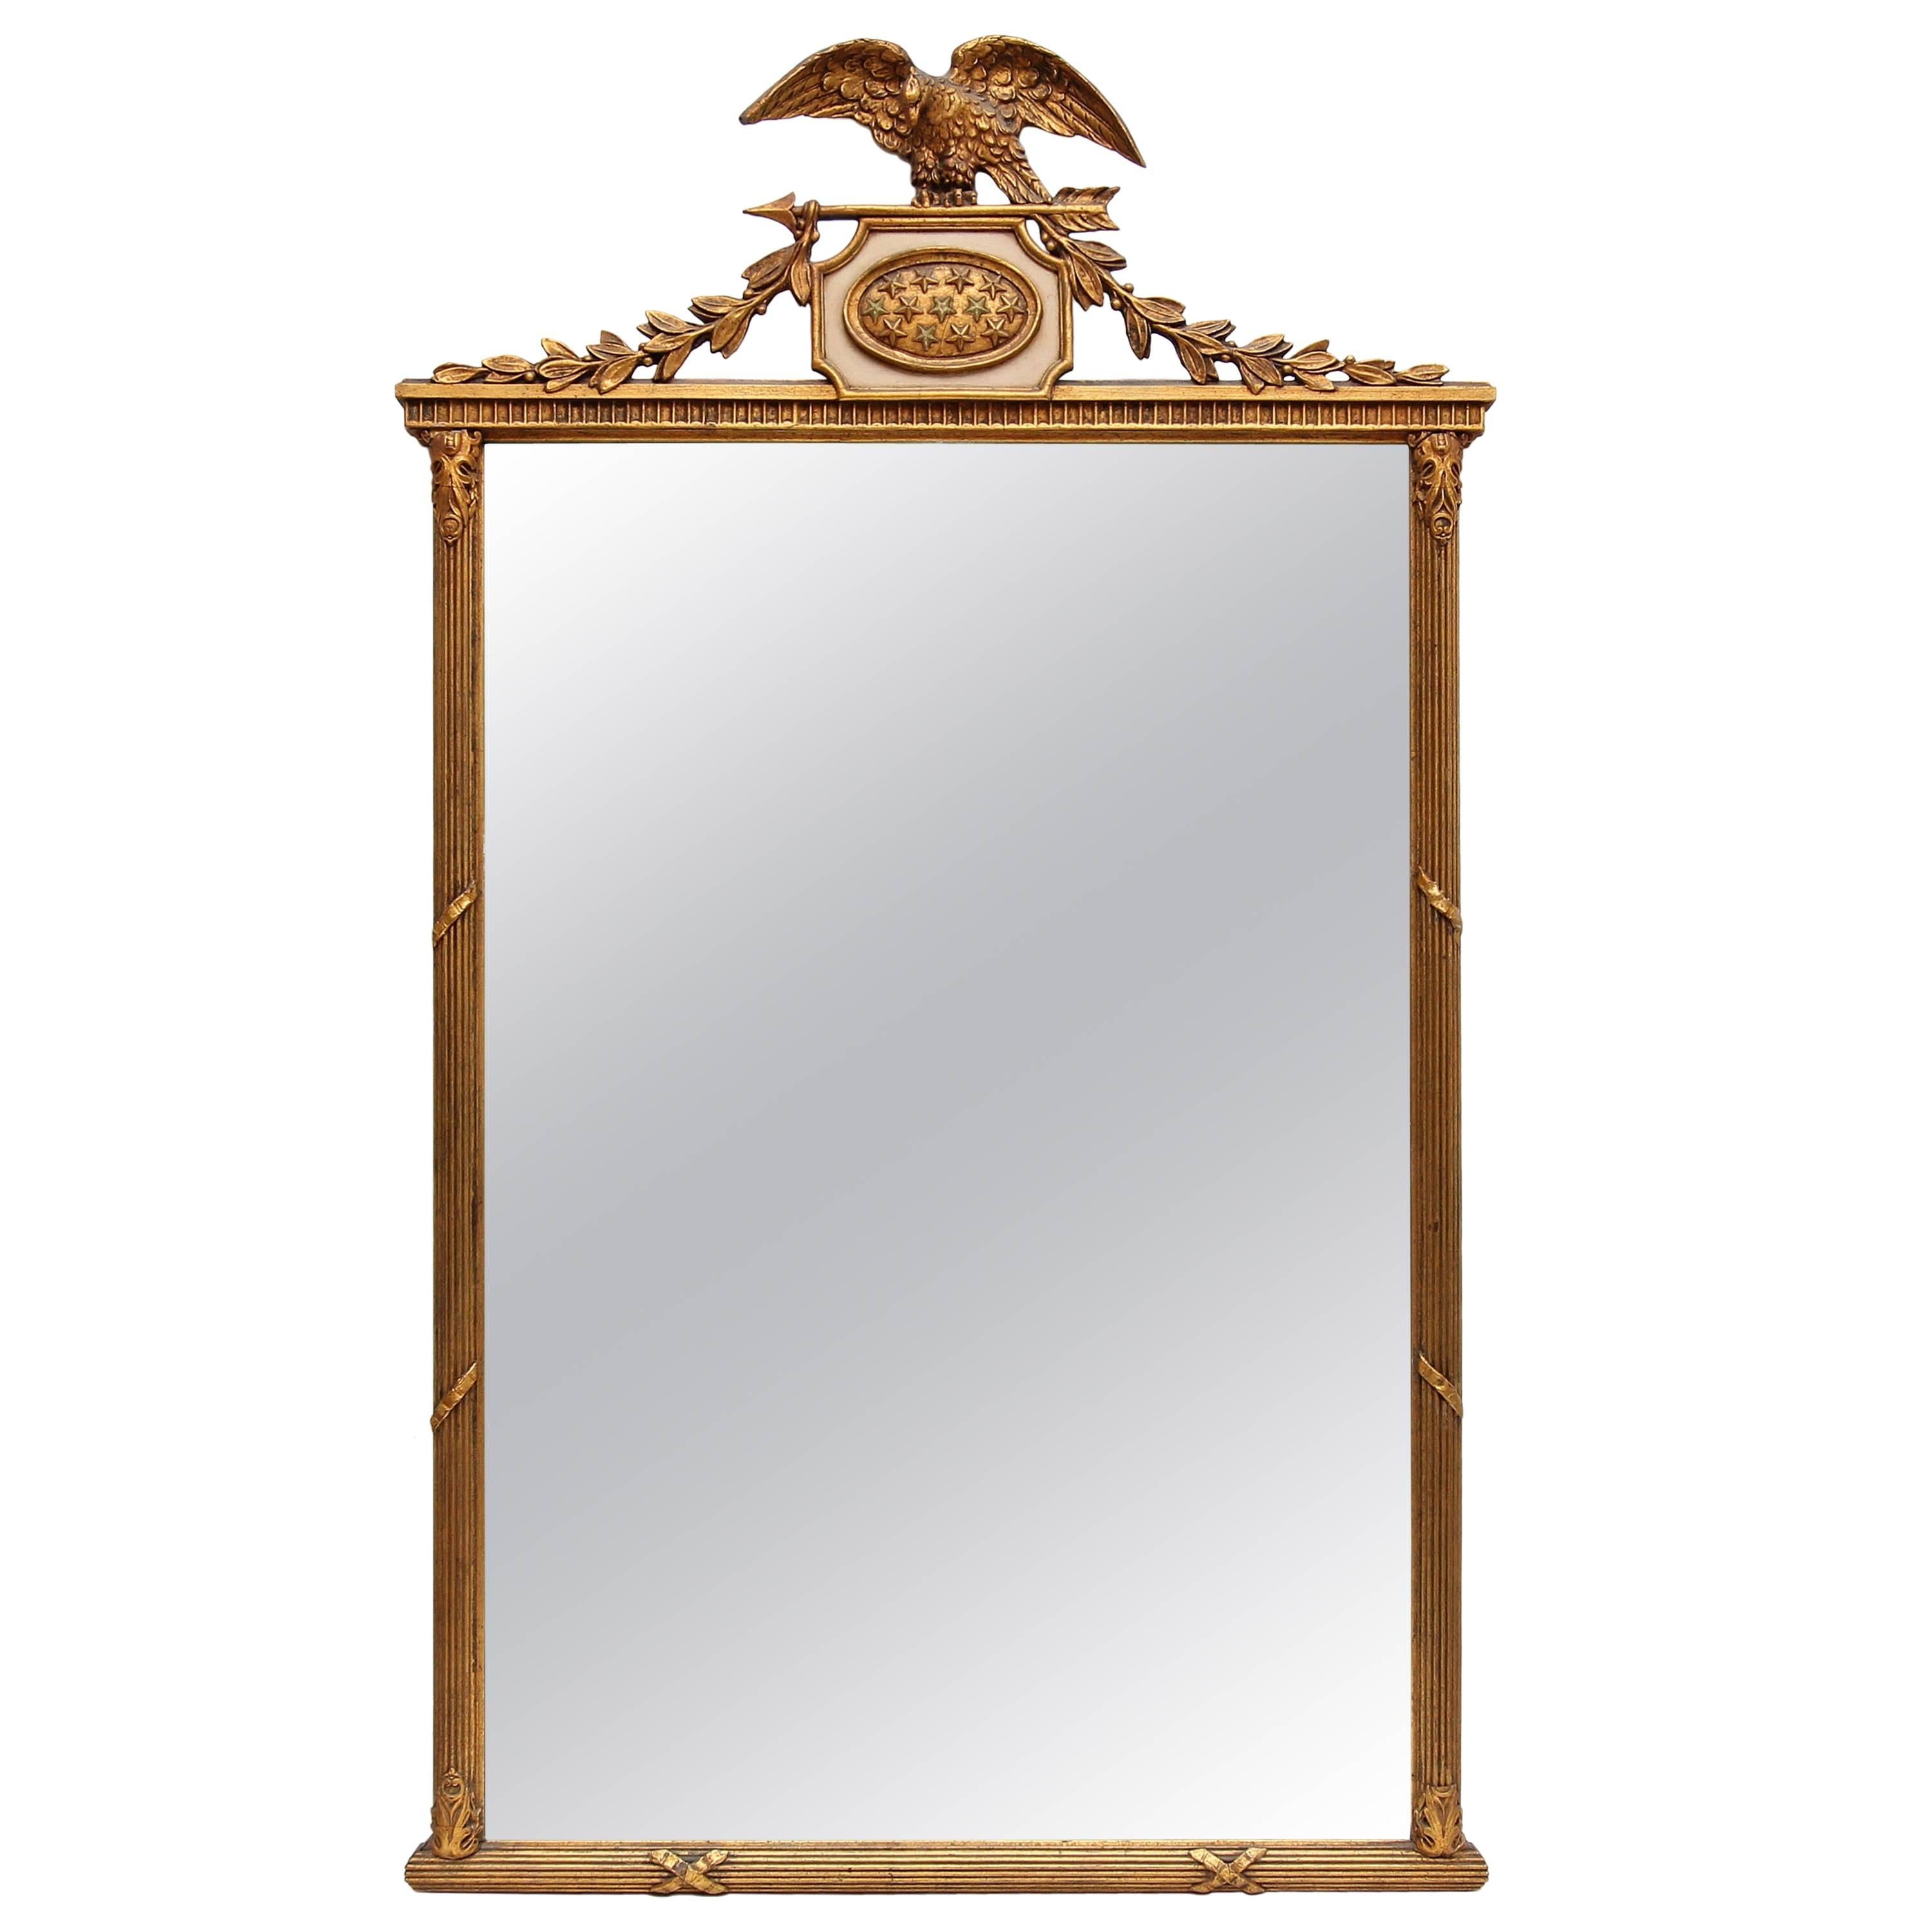  Chippendale  Style Gilt Mirror